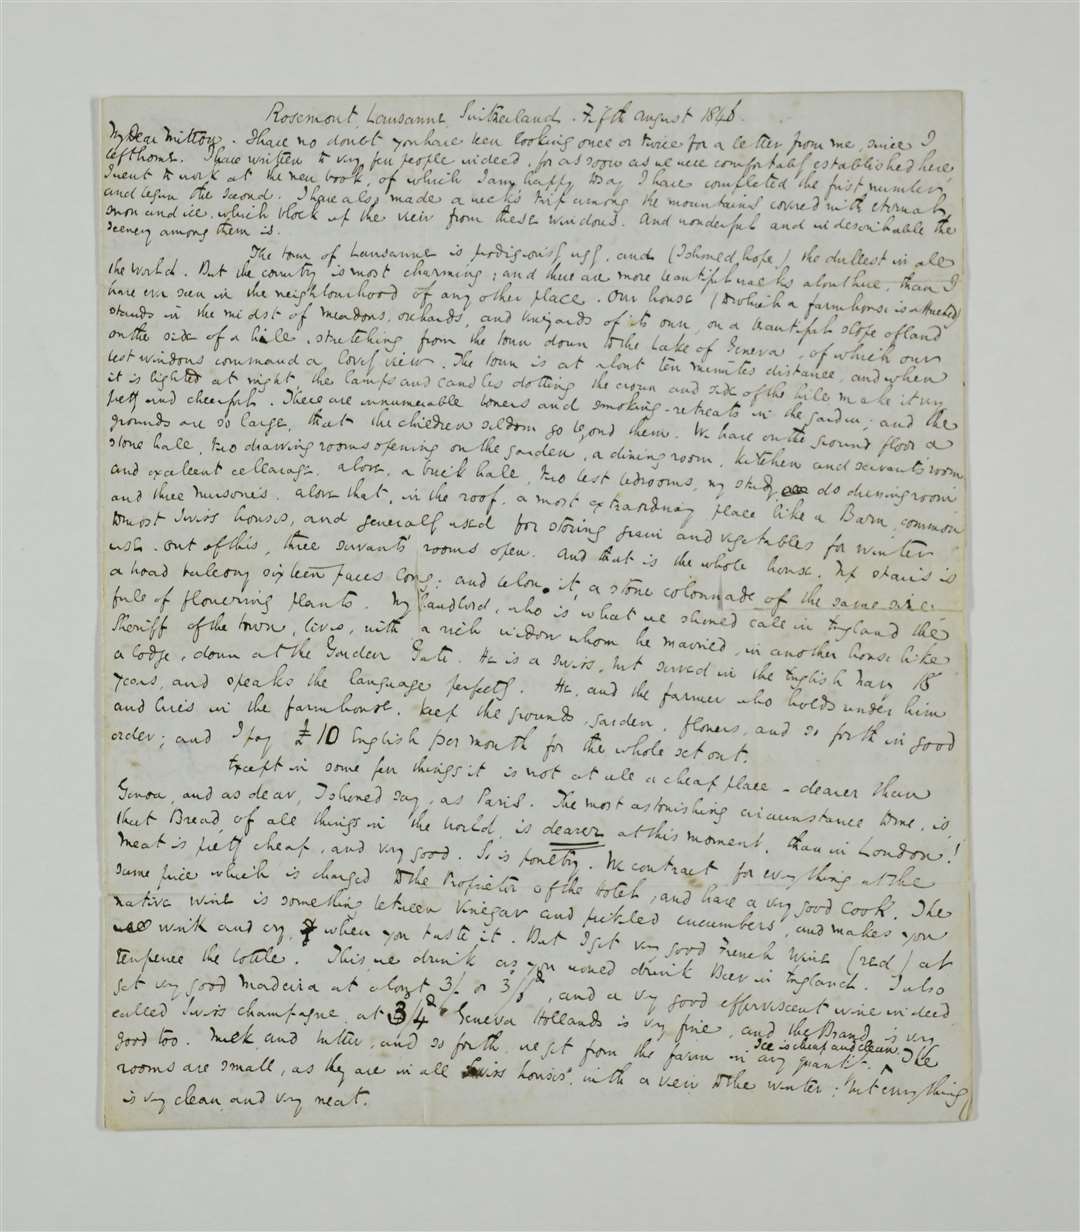 A letter written from Lausanne on August 5 1846 to his friend and solicitor Thomas Mitton in which Dickens describes his stay in Switzerland (Charles Dickens Museum/PA)